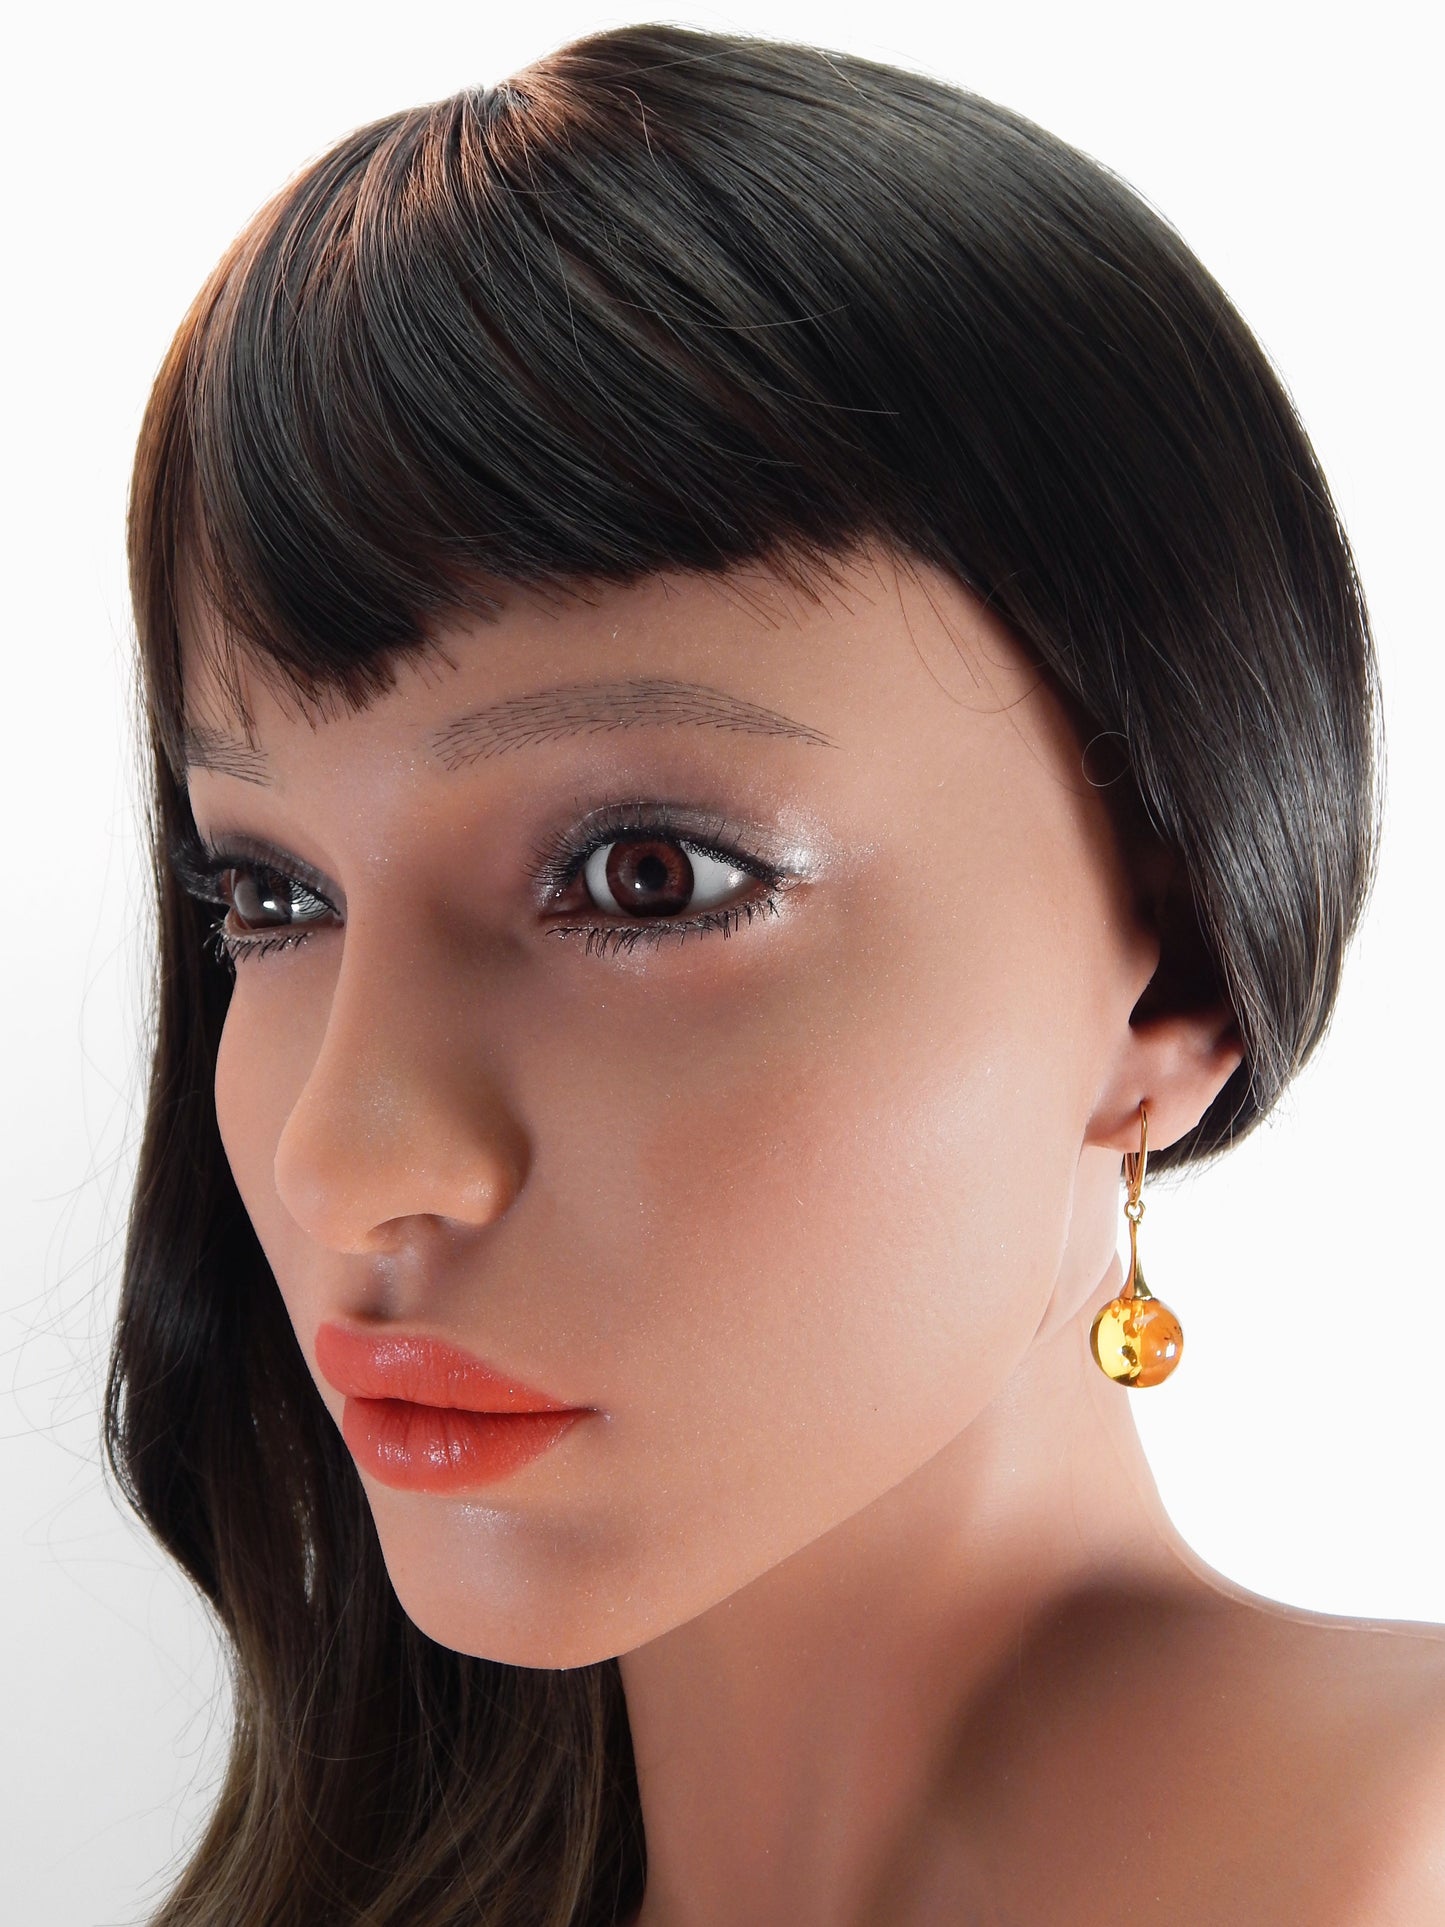 Natural Baltic Cognac Amber Sphere Modern Earrings in 14k Gold Plated s925